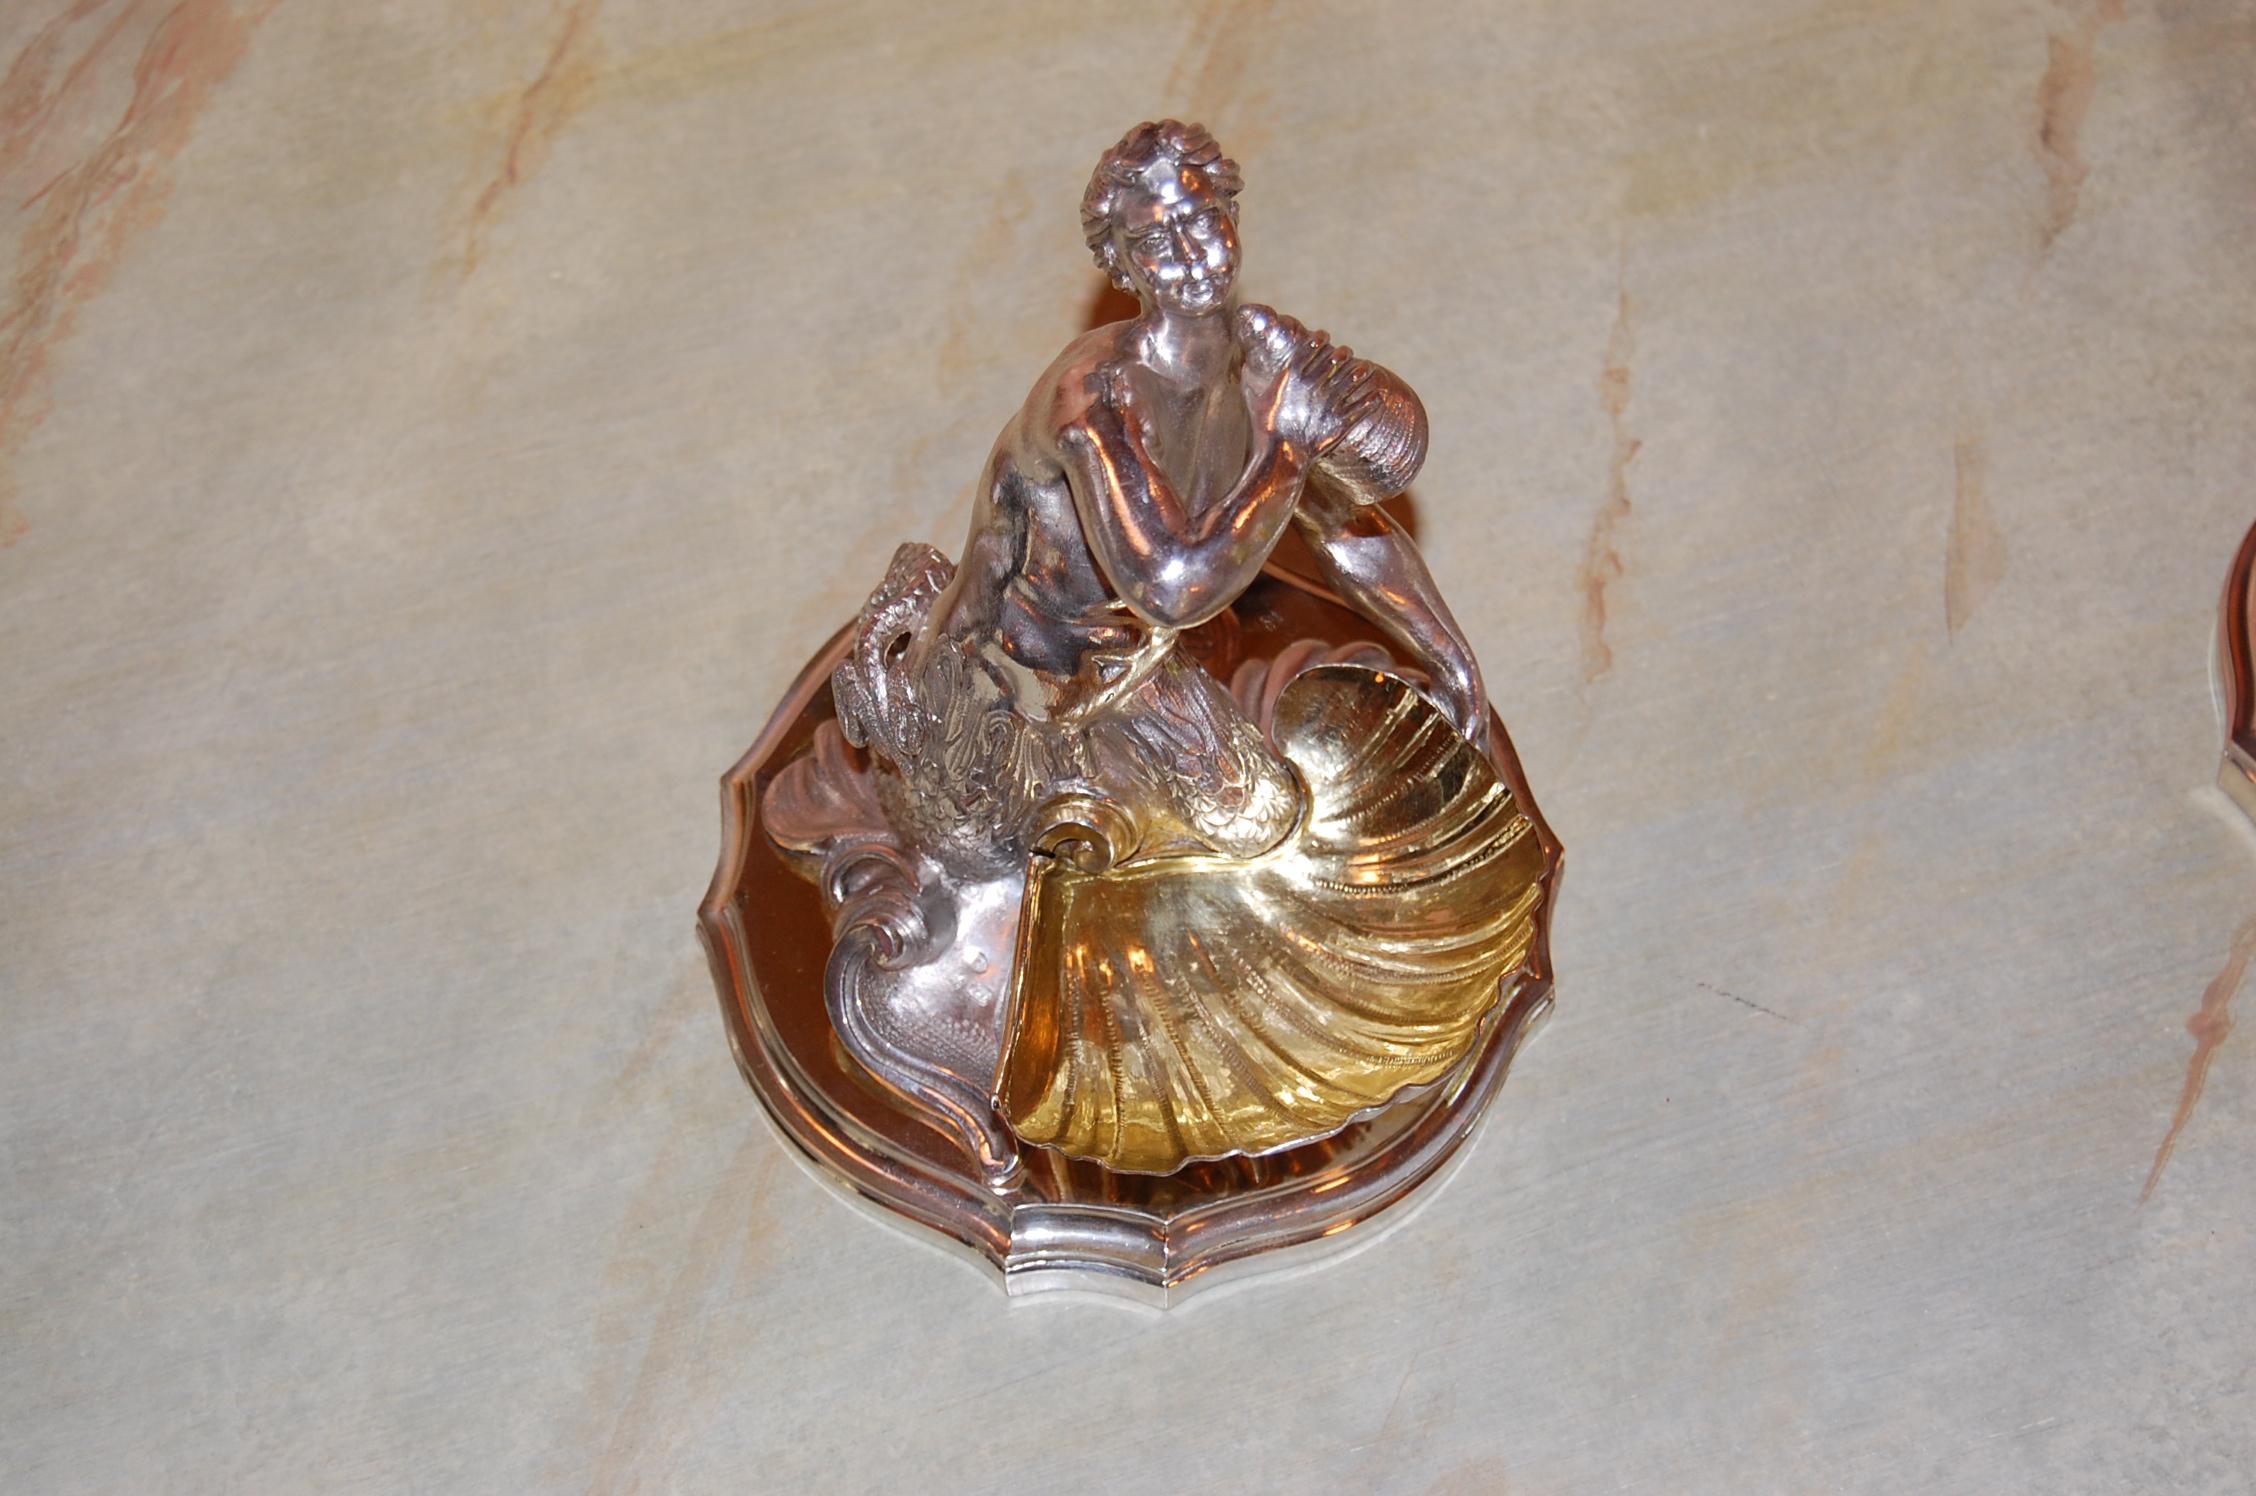 Silver Plated Candy/ Nut Bowls Depicting a Neptune God-Like Mermaid Figure, Pair For Sale 3